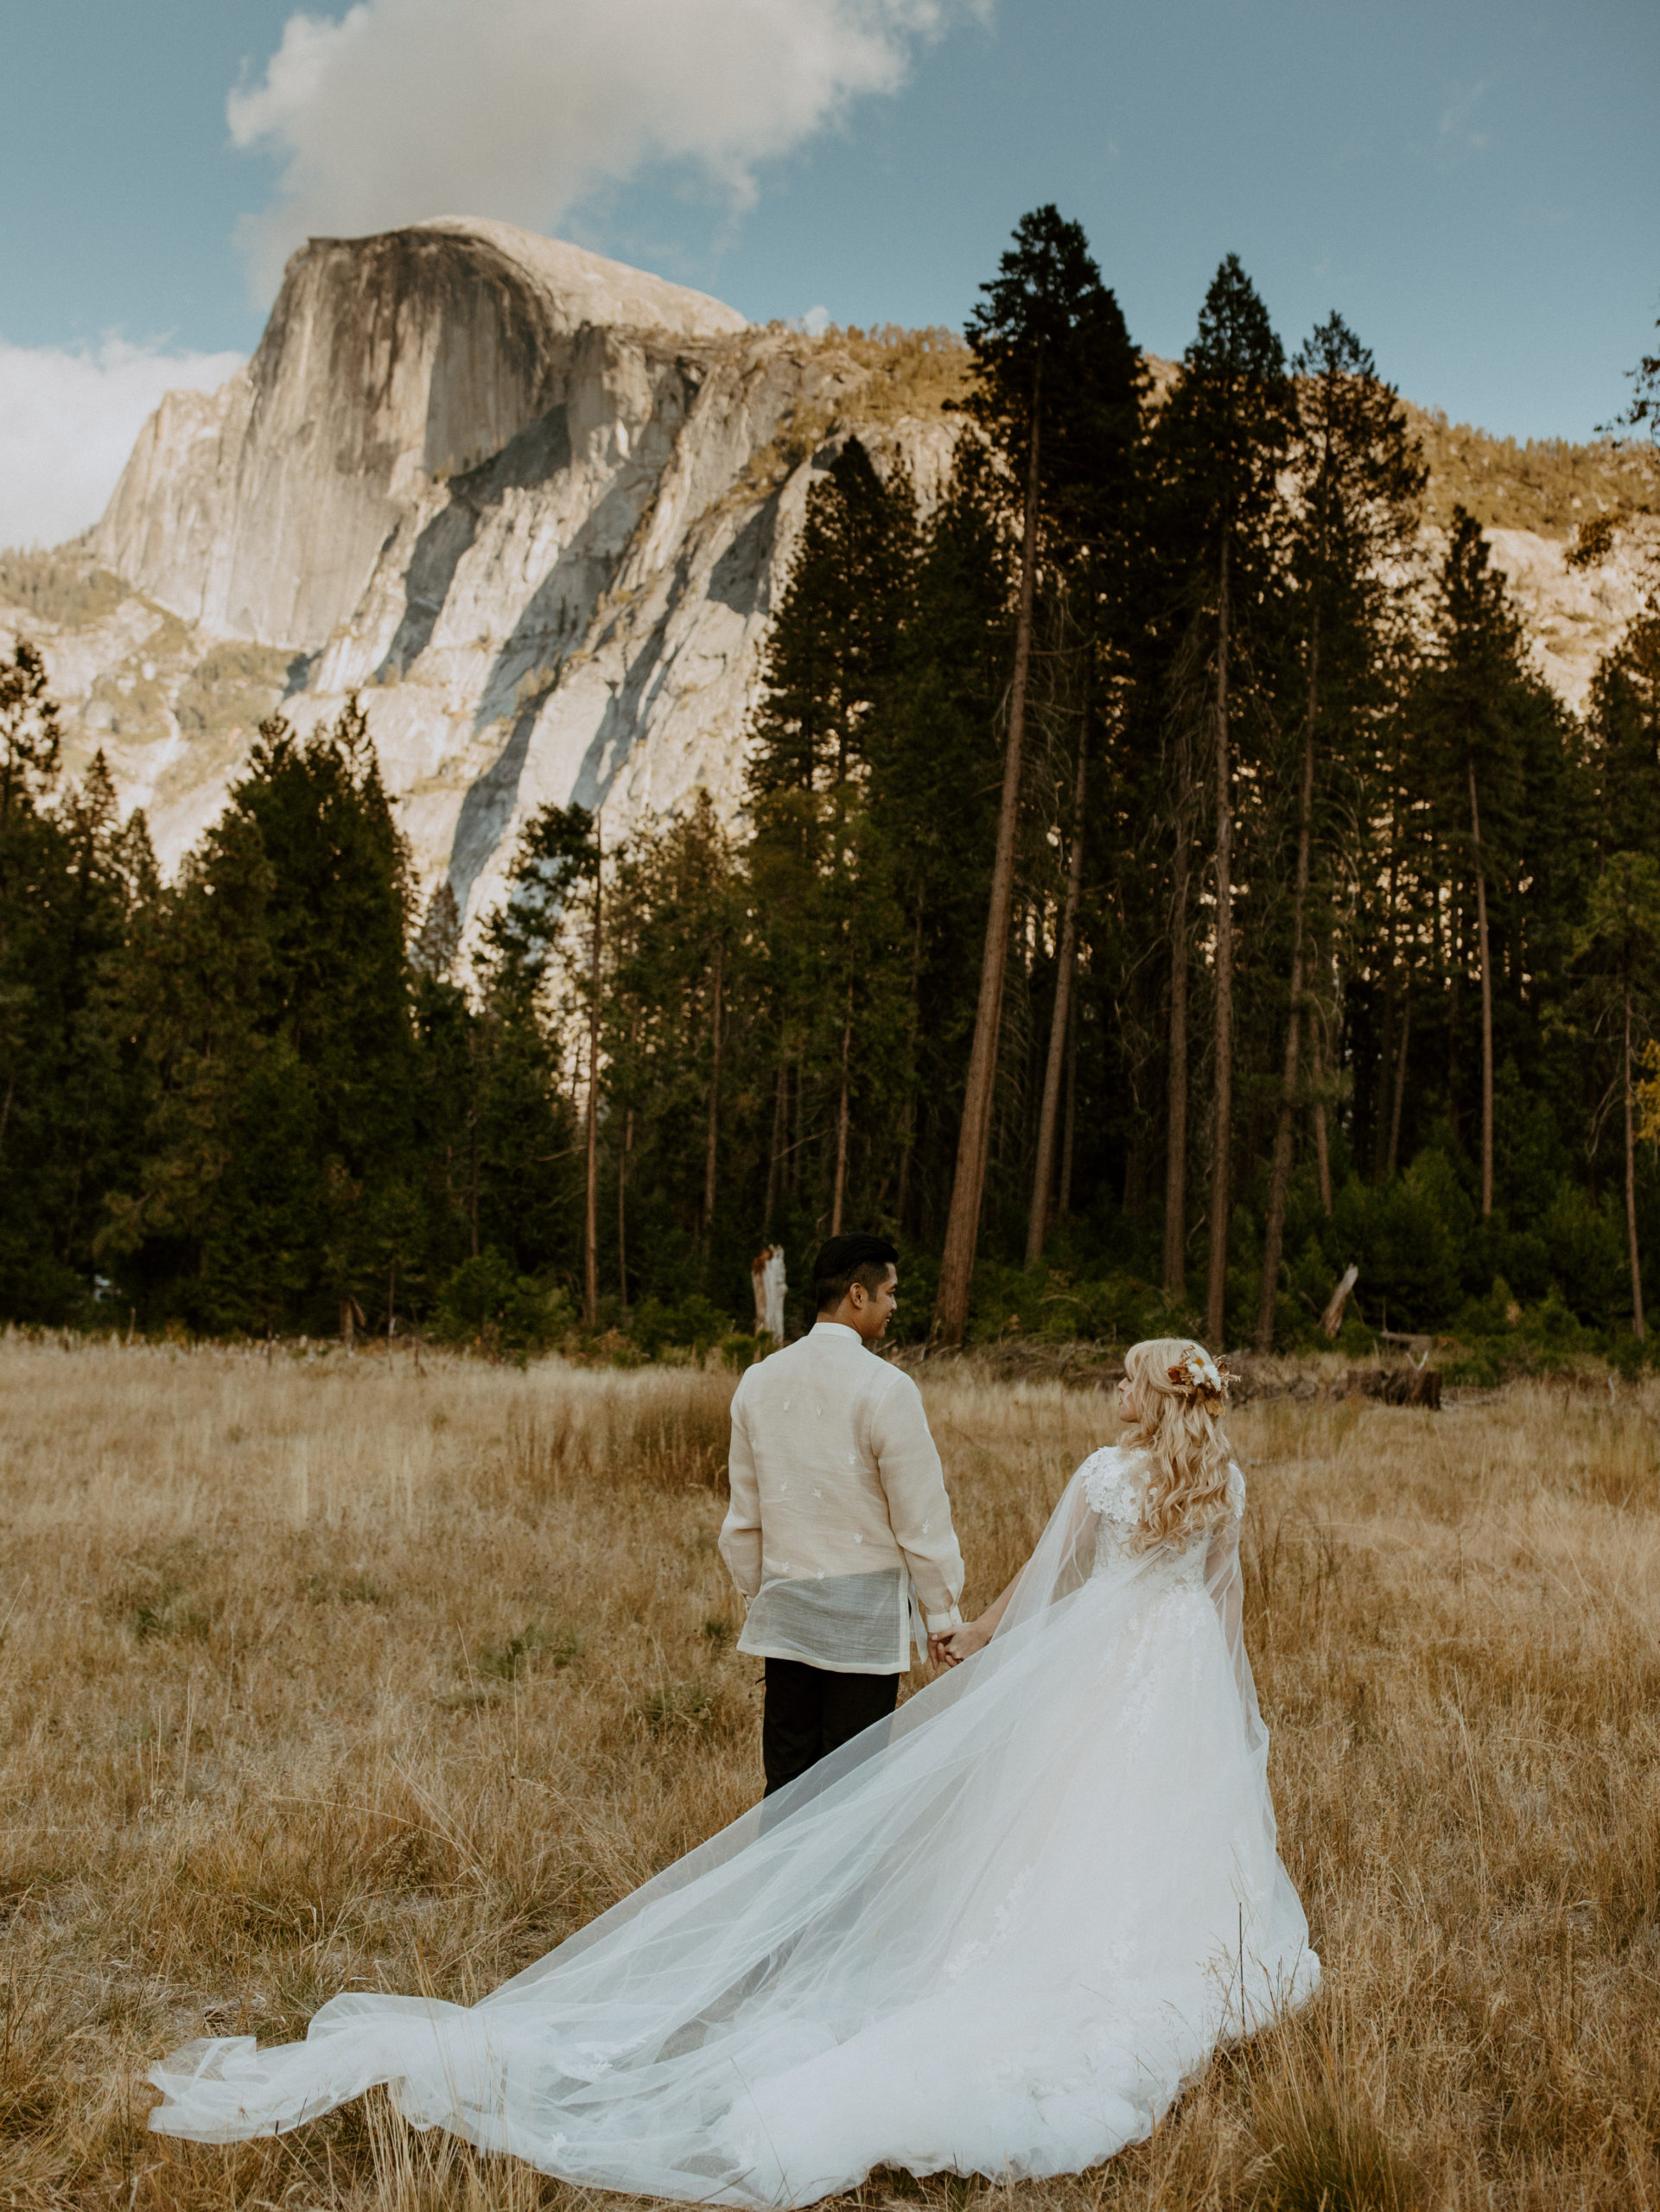 the couple looking at each other in Yosemite Valley